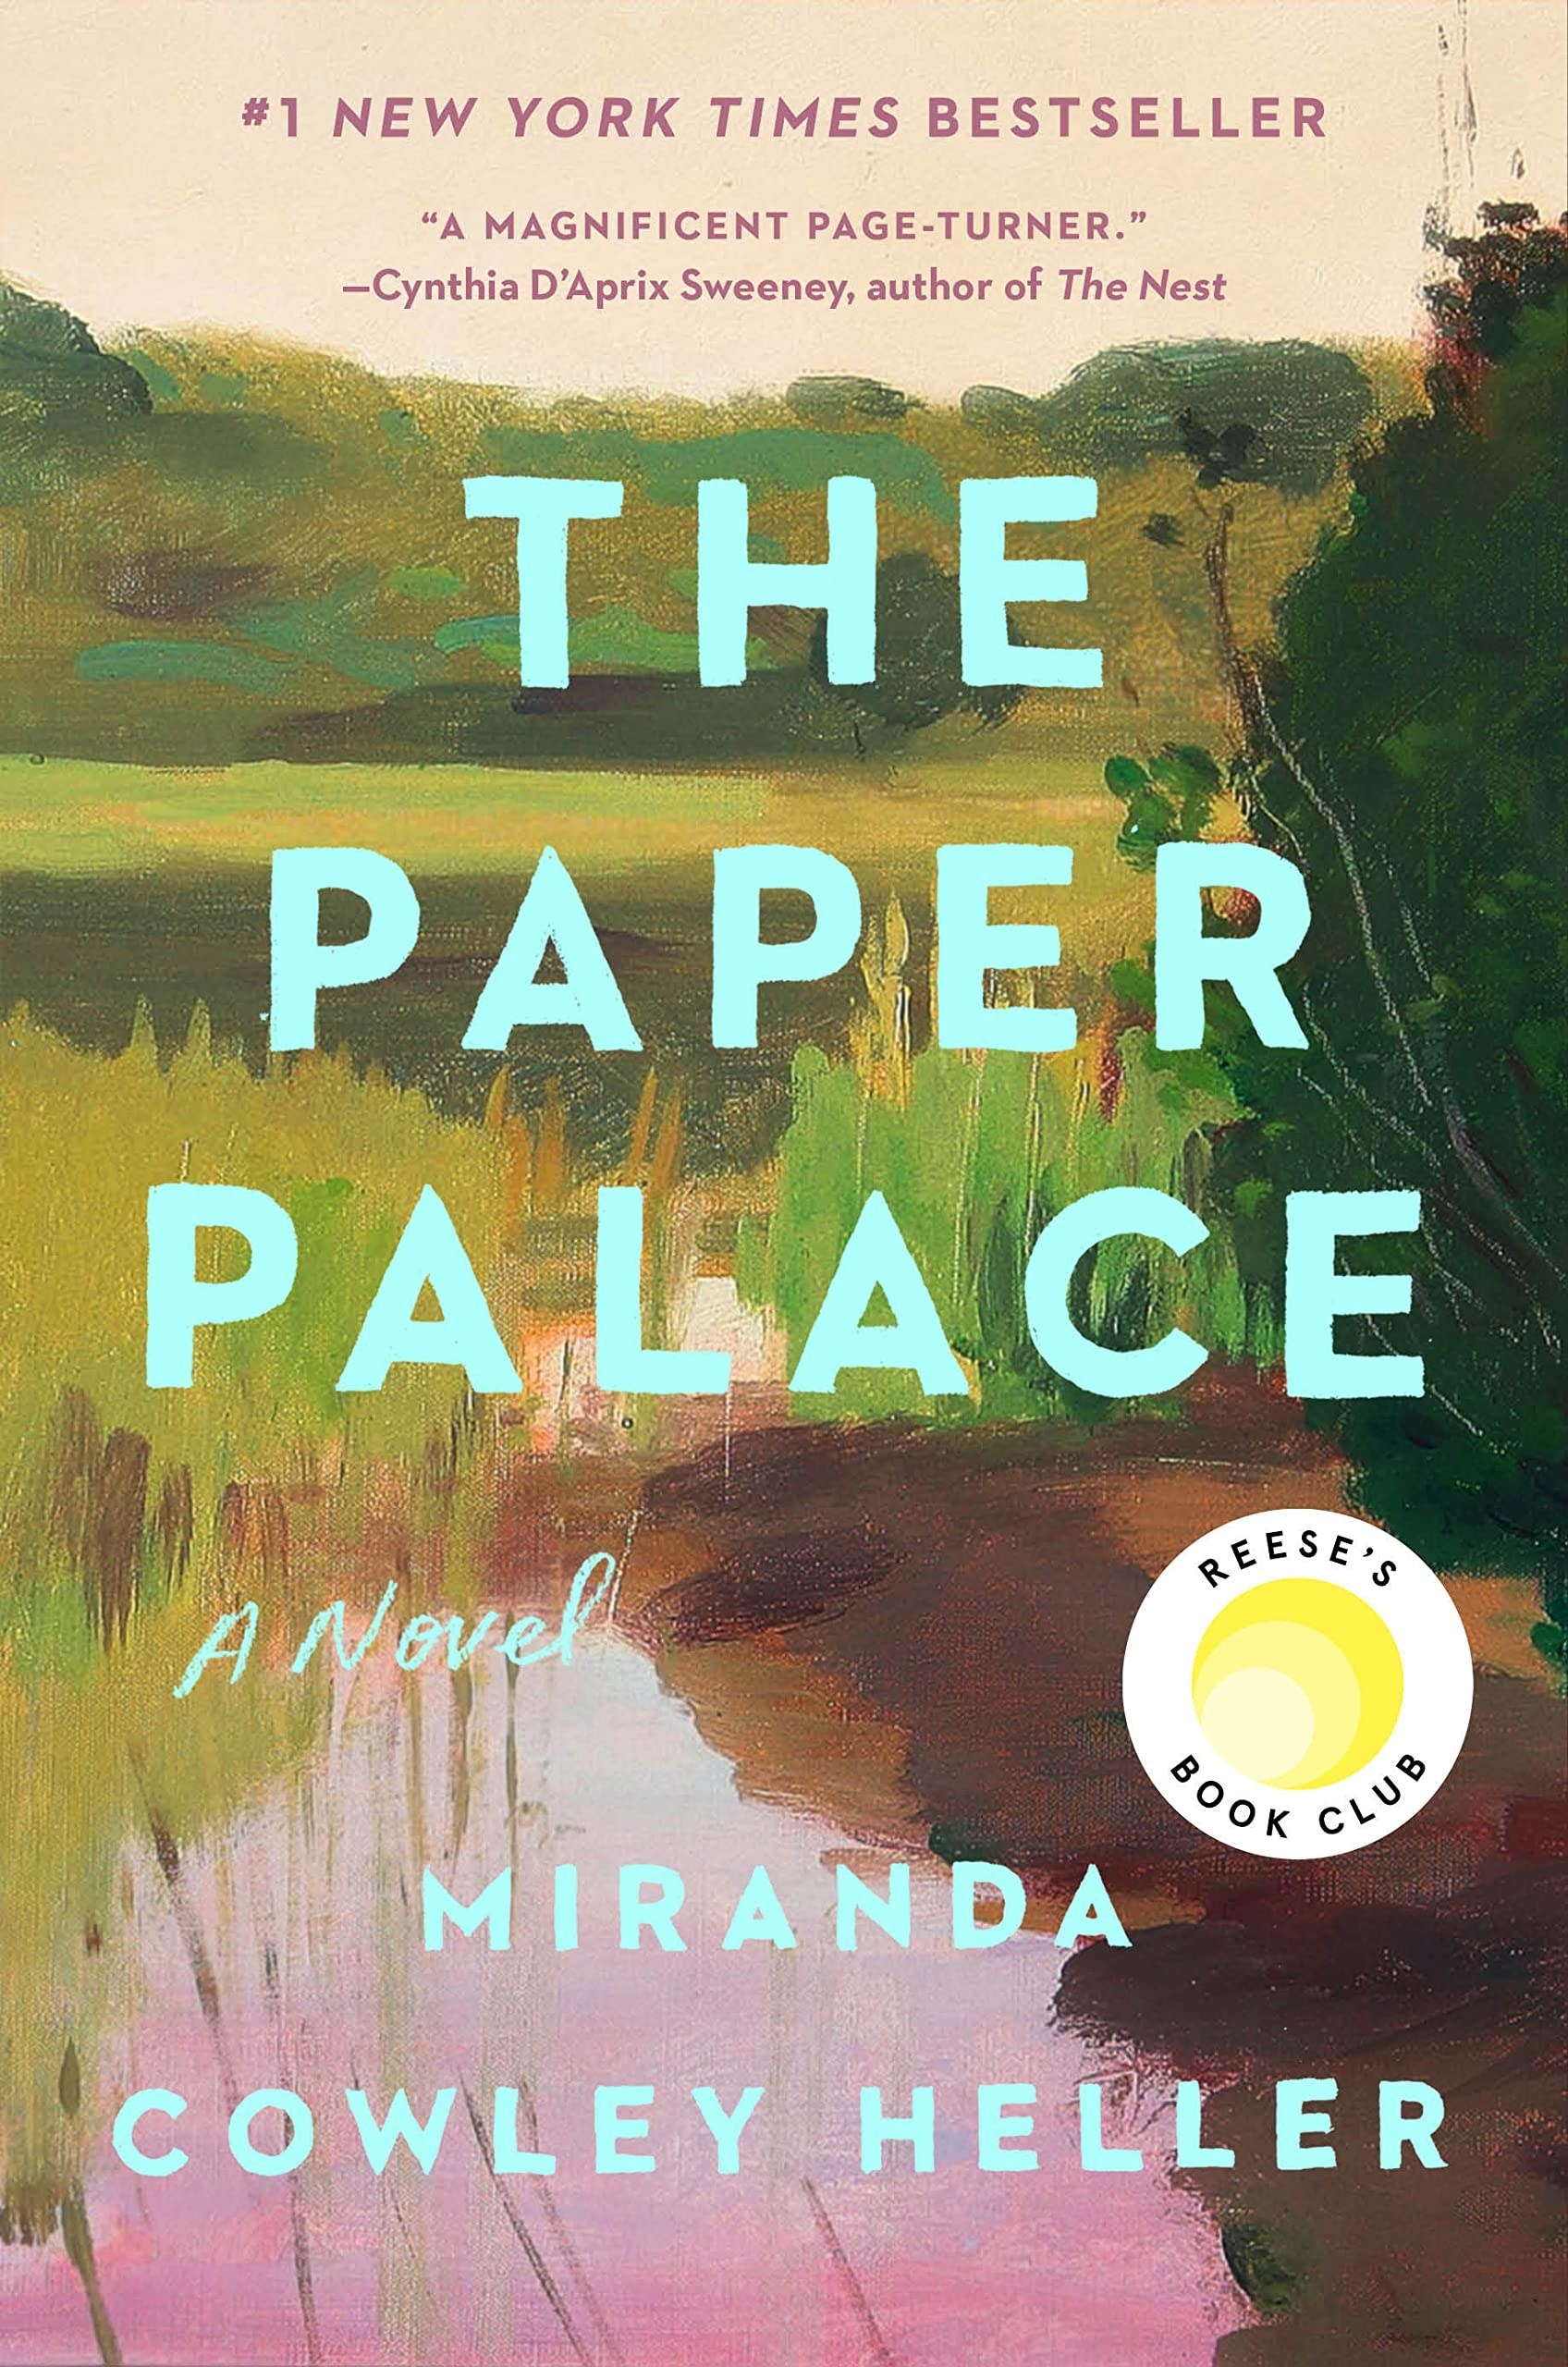 The cover of &quot;The Paper Palace&quot; by Miranda Cowley Heller.